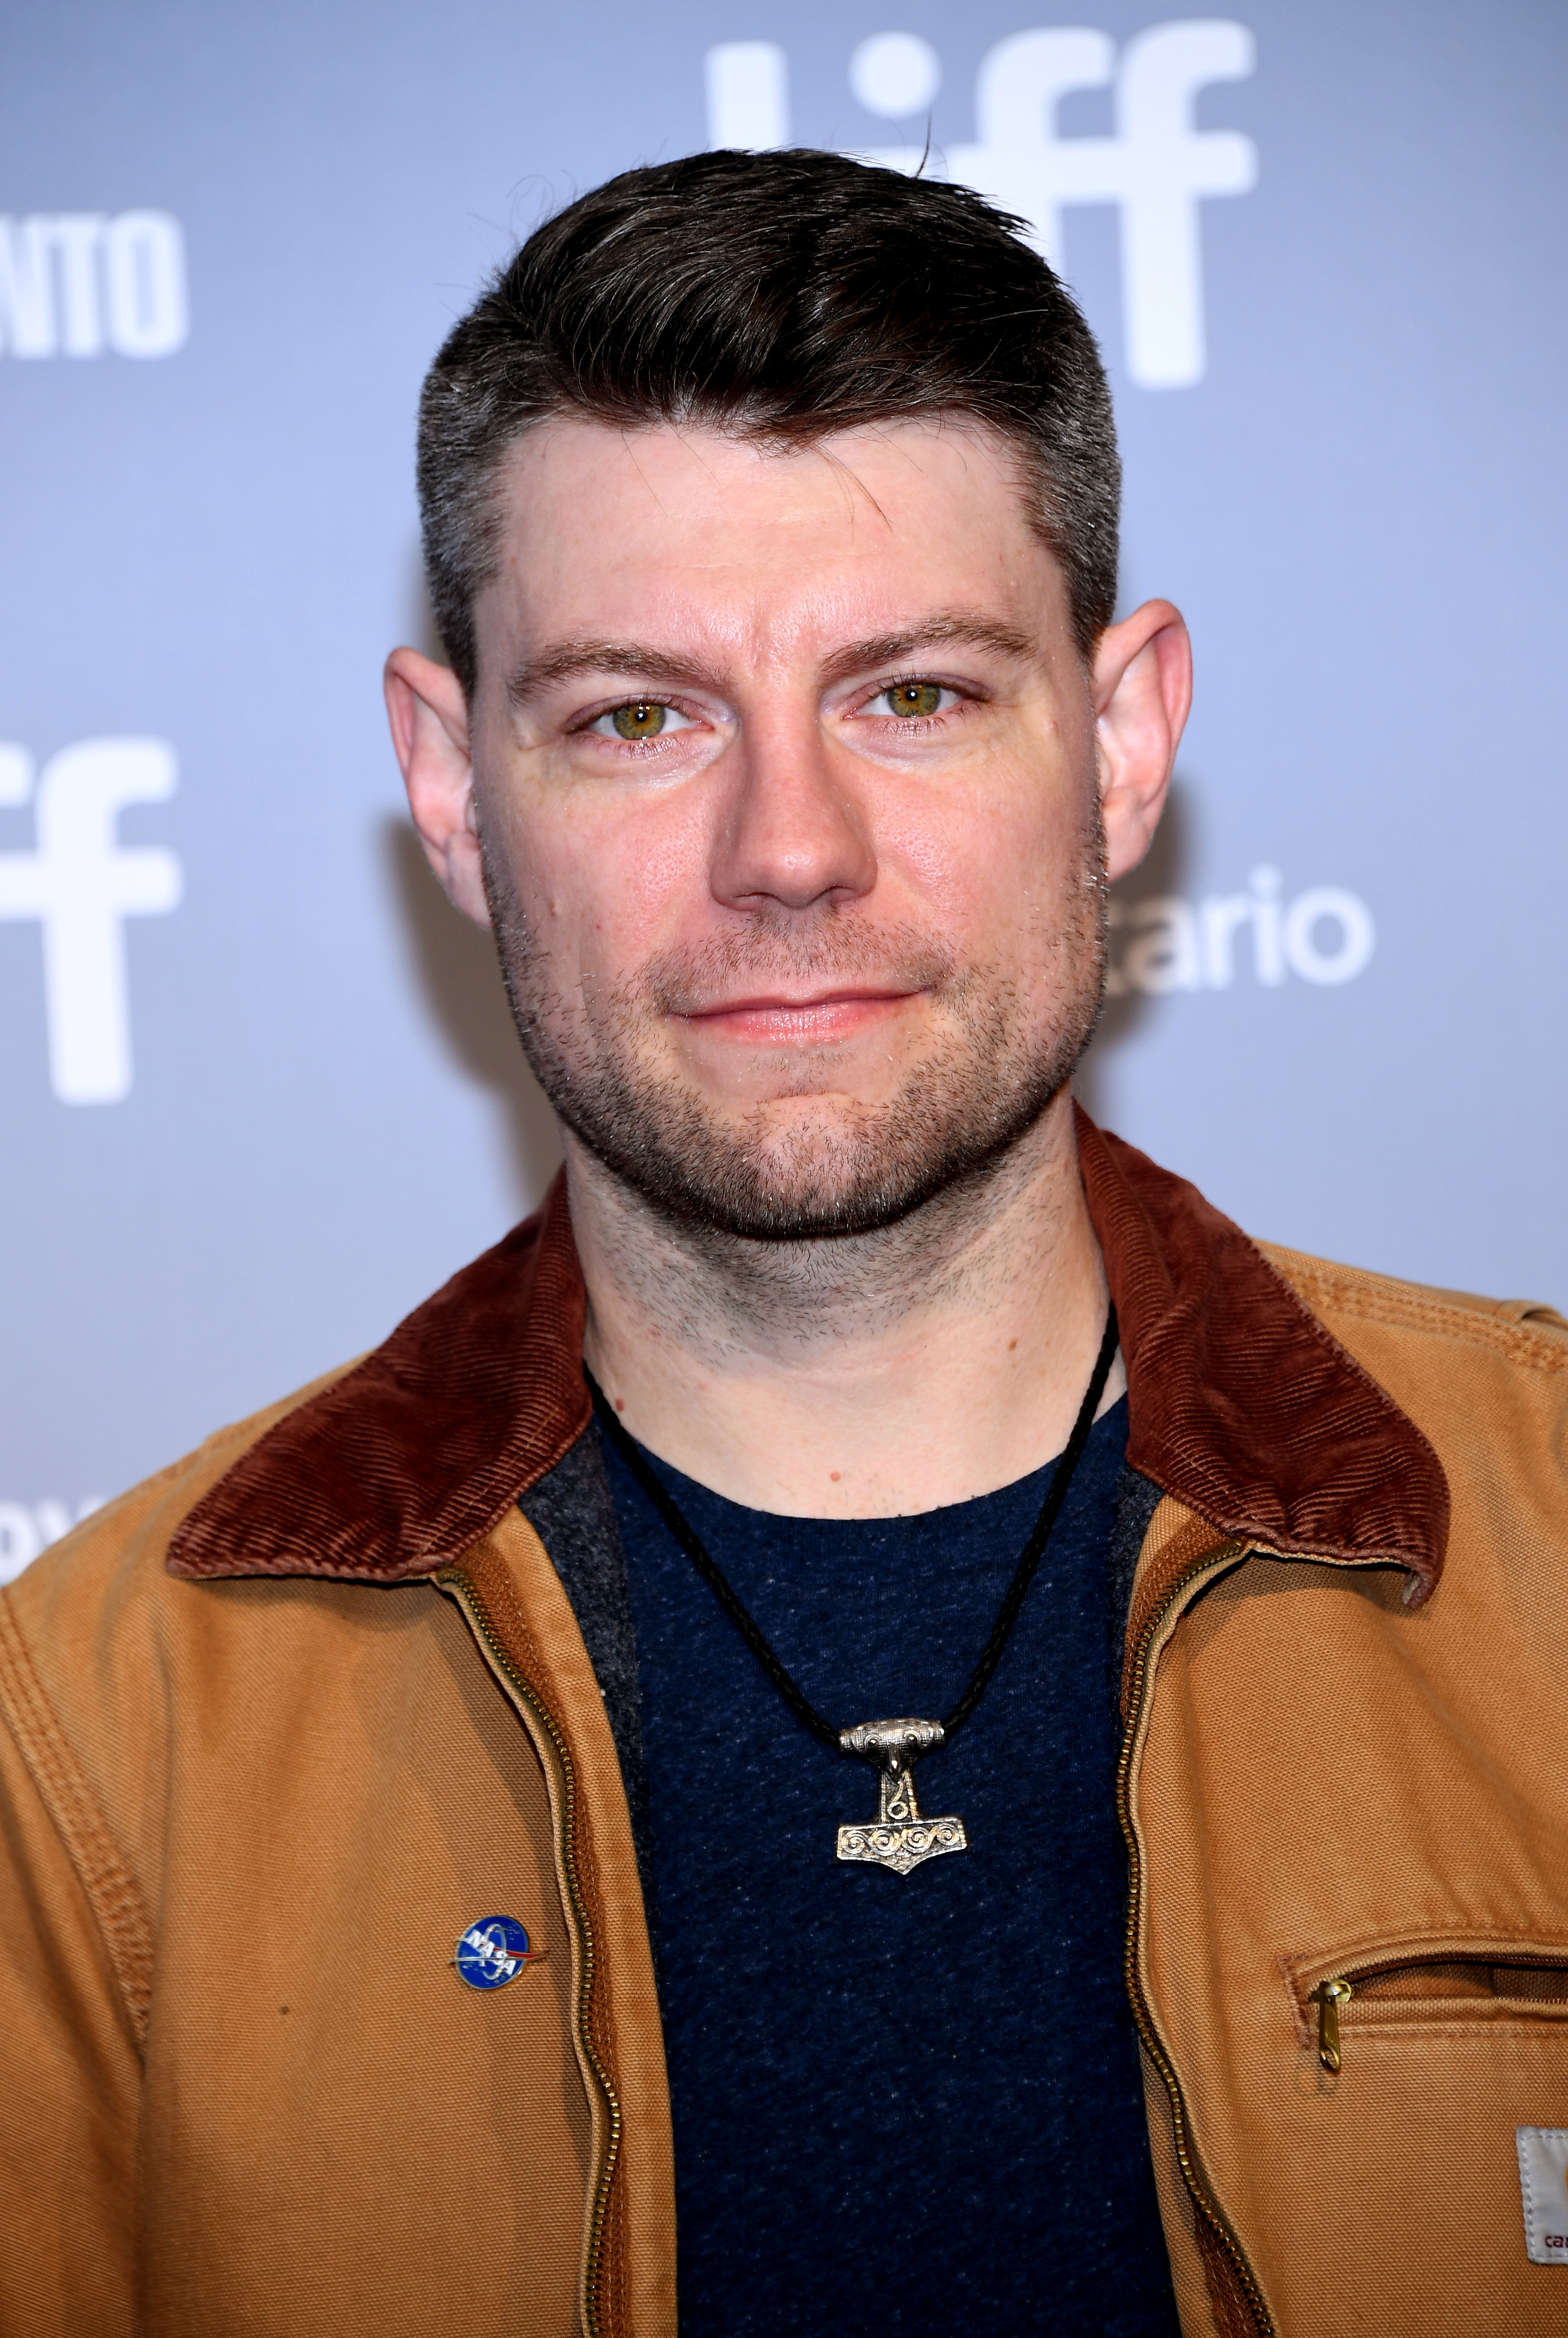 Patrick Fugit during 2018 Toronto International Film Festival at TIFF Bell Lightbox on September 11, 2018, in Toronto, Canada. | Source: Getty Images